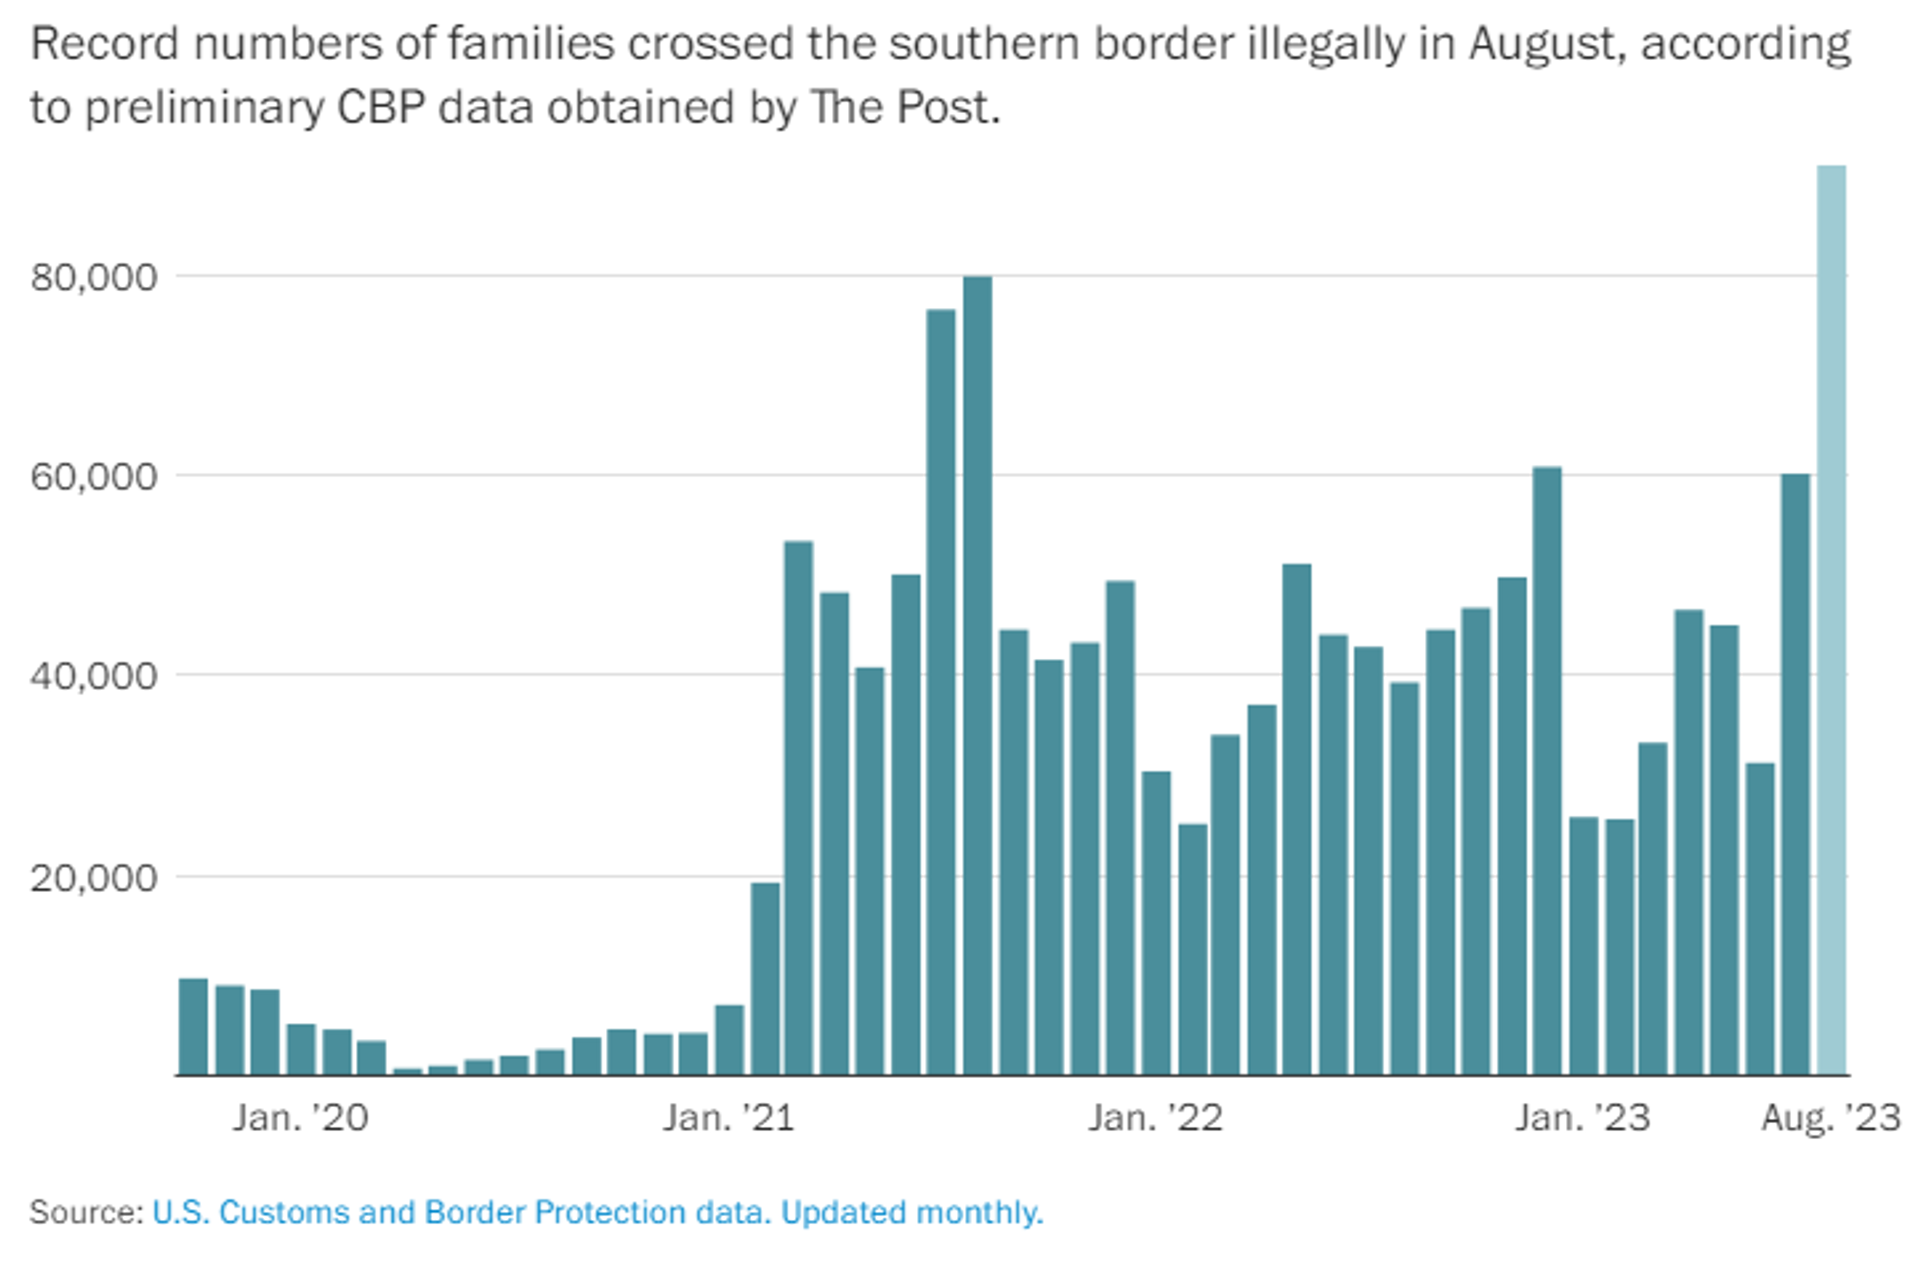 Screenshot of chart showing record numbers of families having crossed the southern border illegally in August, 2023, according to preliminary US Customs and Border Protection (CBP) data. - Sputnik International, 1920, 09.09.2023